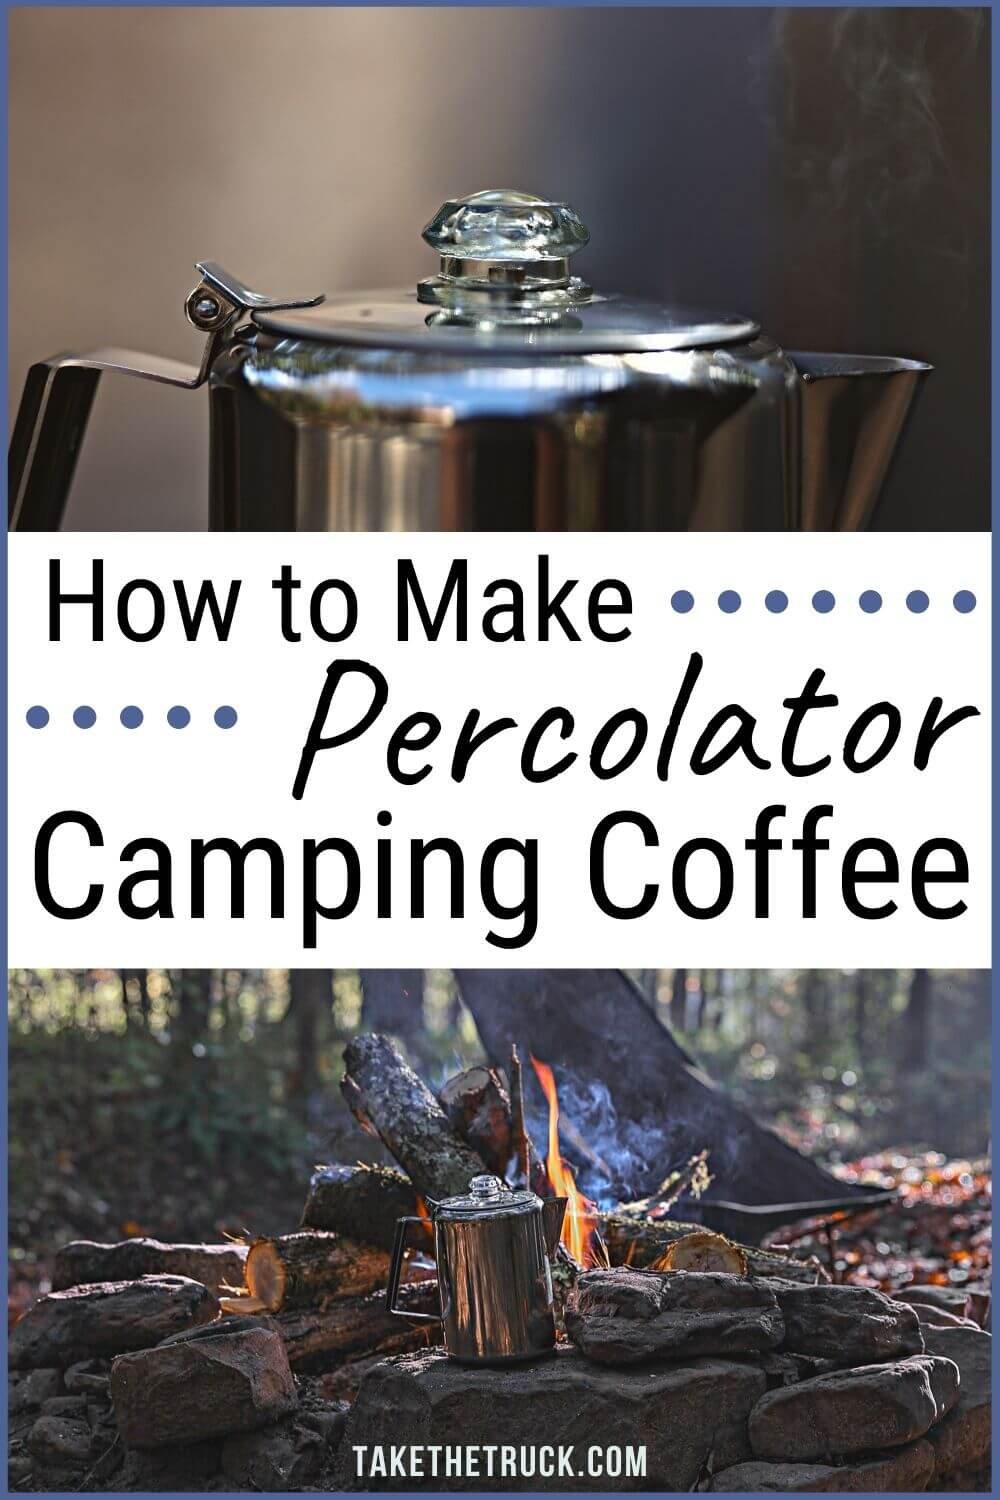 Tips on how to use a percolator for camping coffee. How to find the best camping percolator. How to clean a percolator coffee pot. Camping coffee percolator tips and tricks.